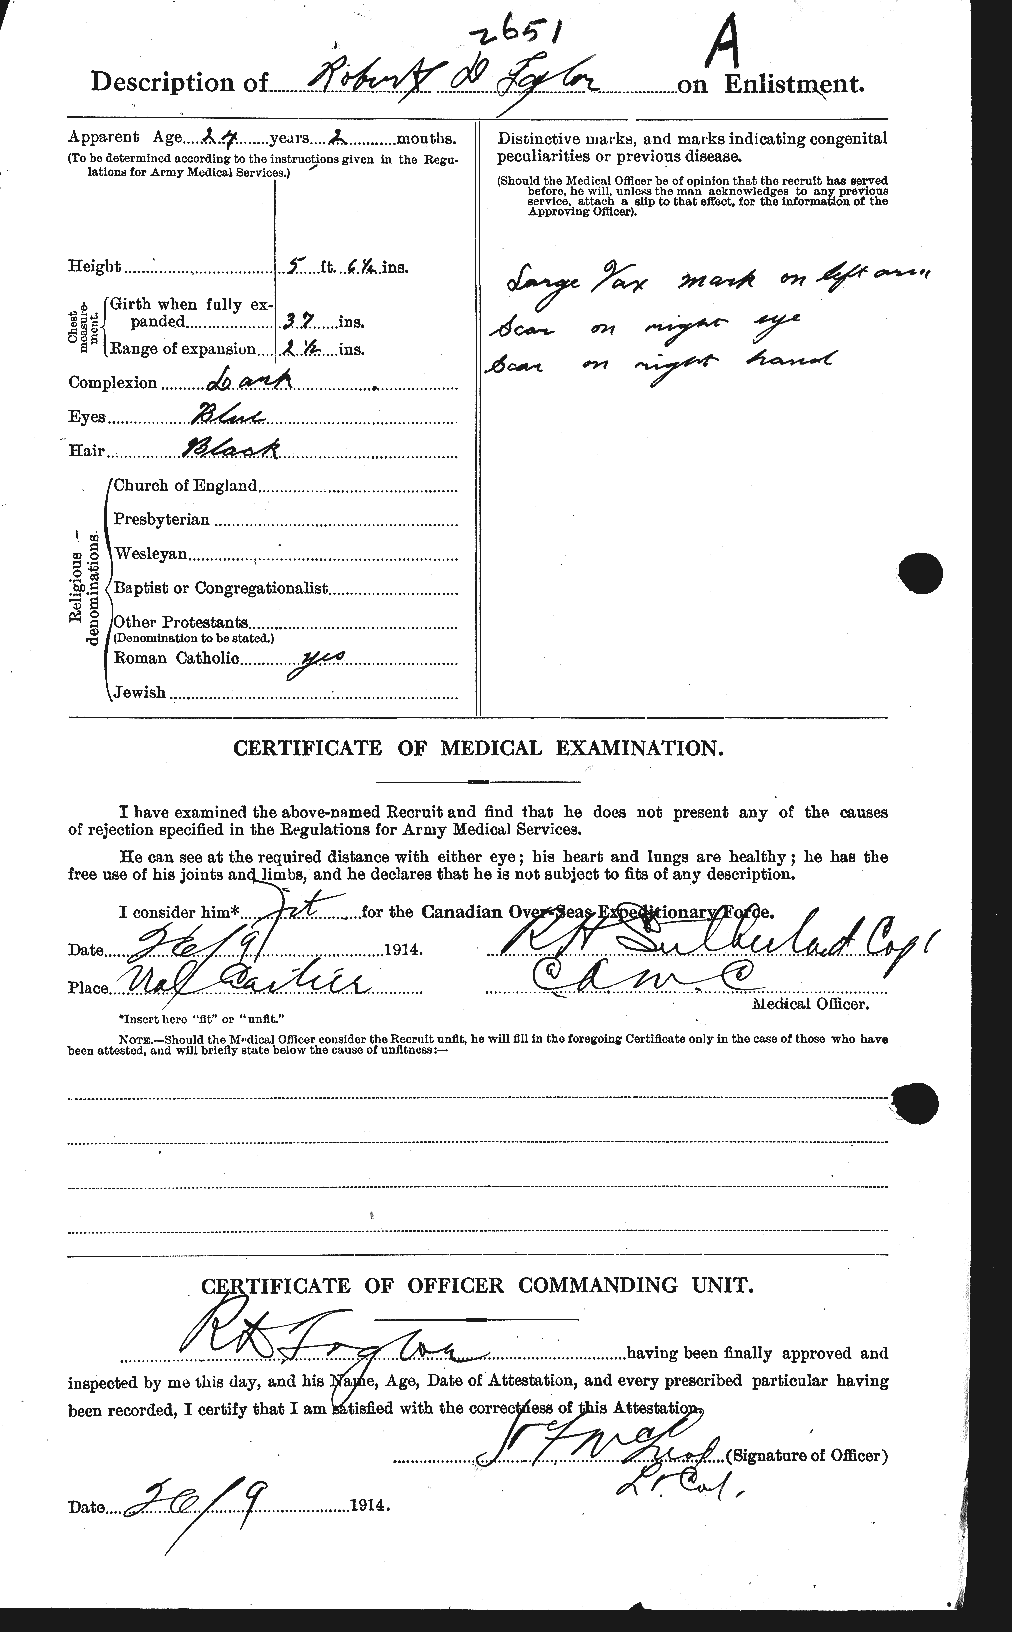 Personnel Records of the First World War - CEF 627468b